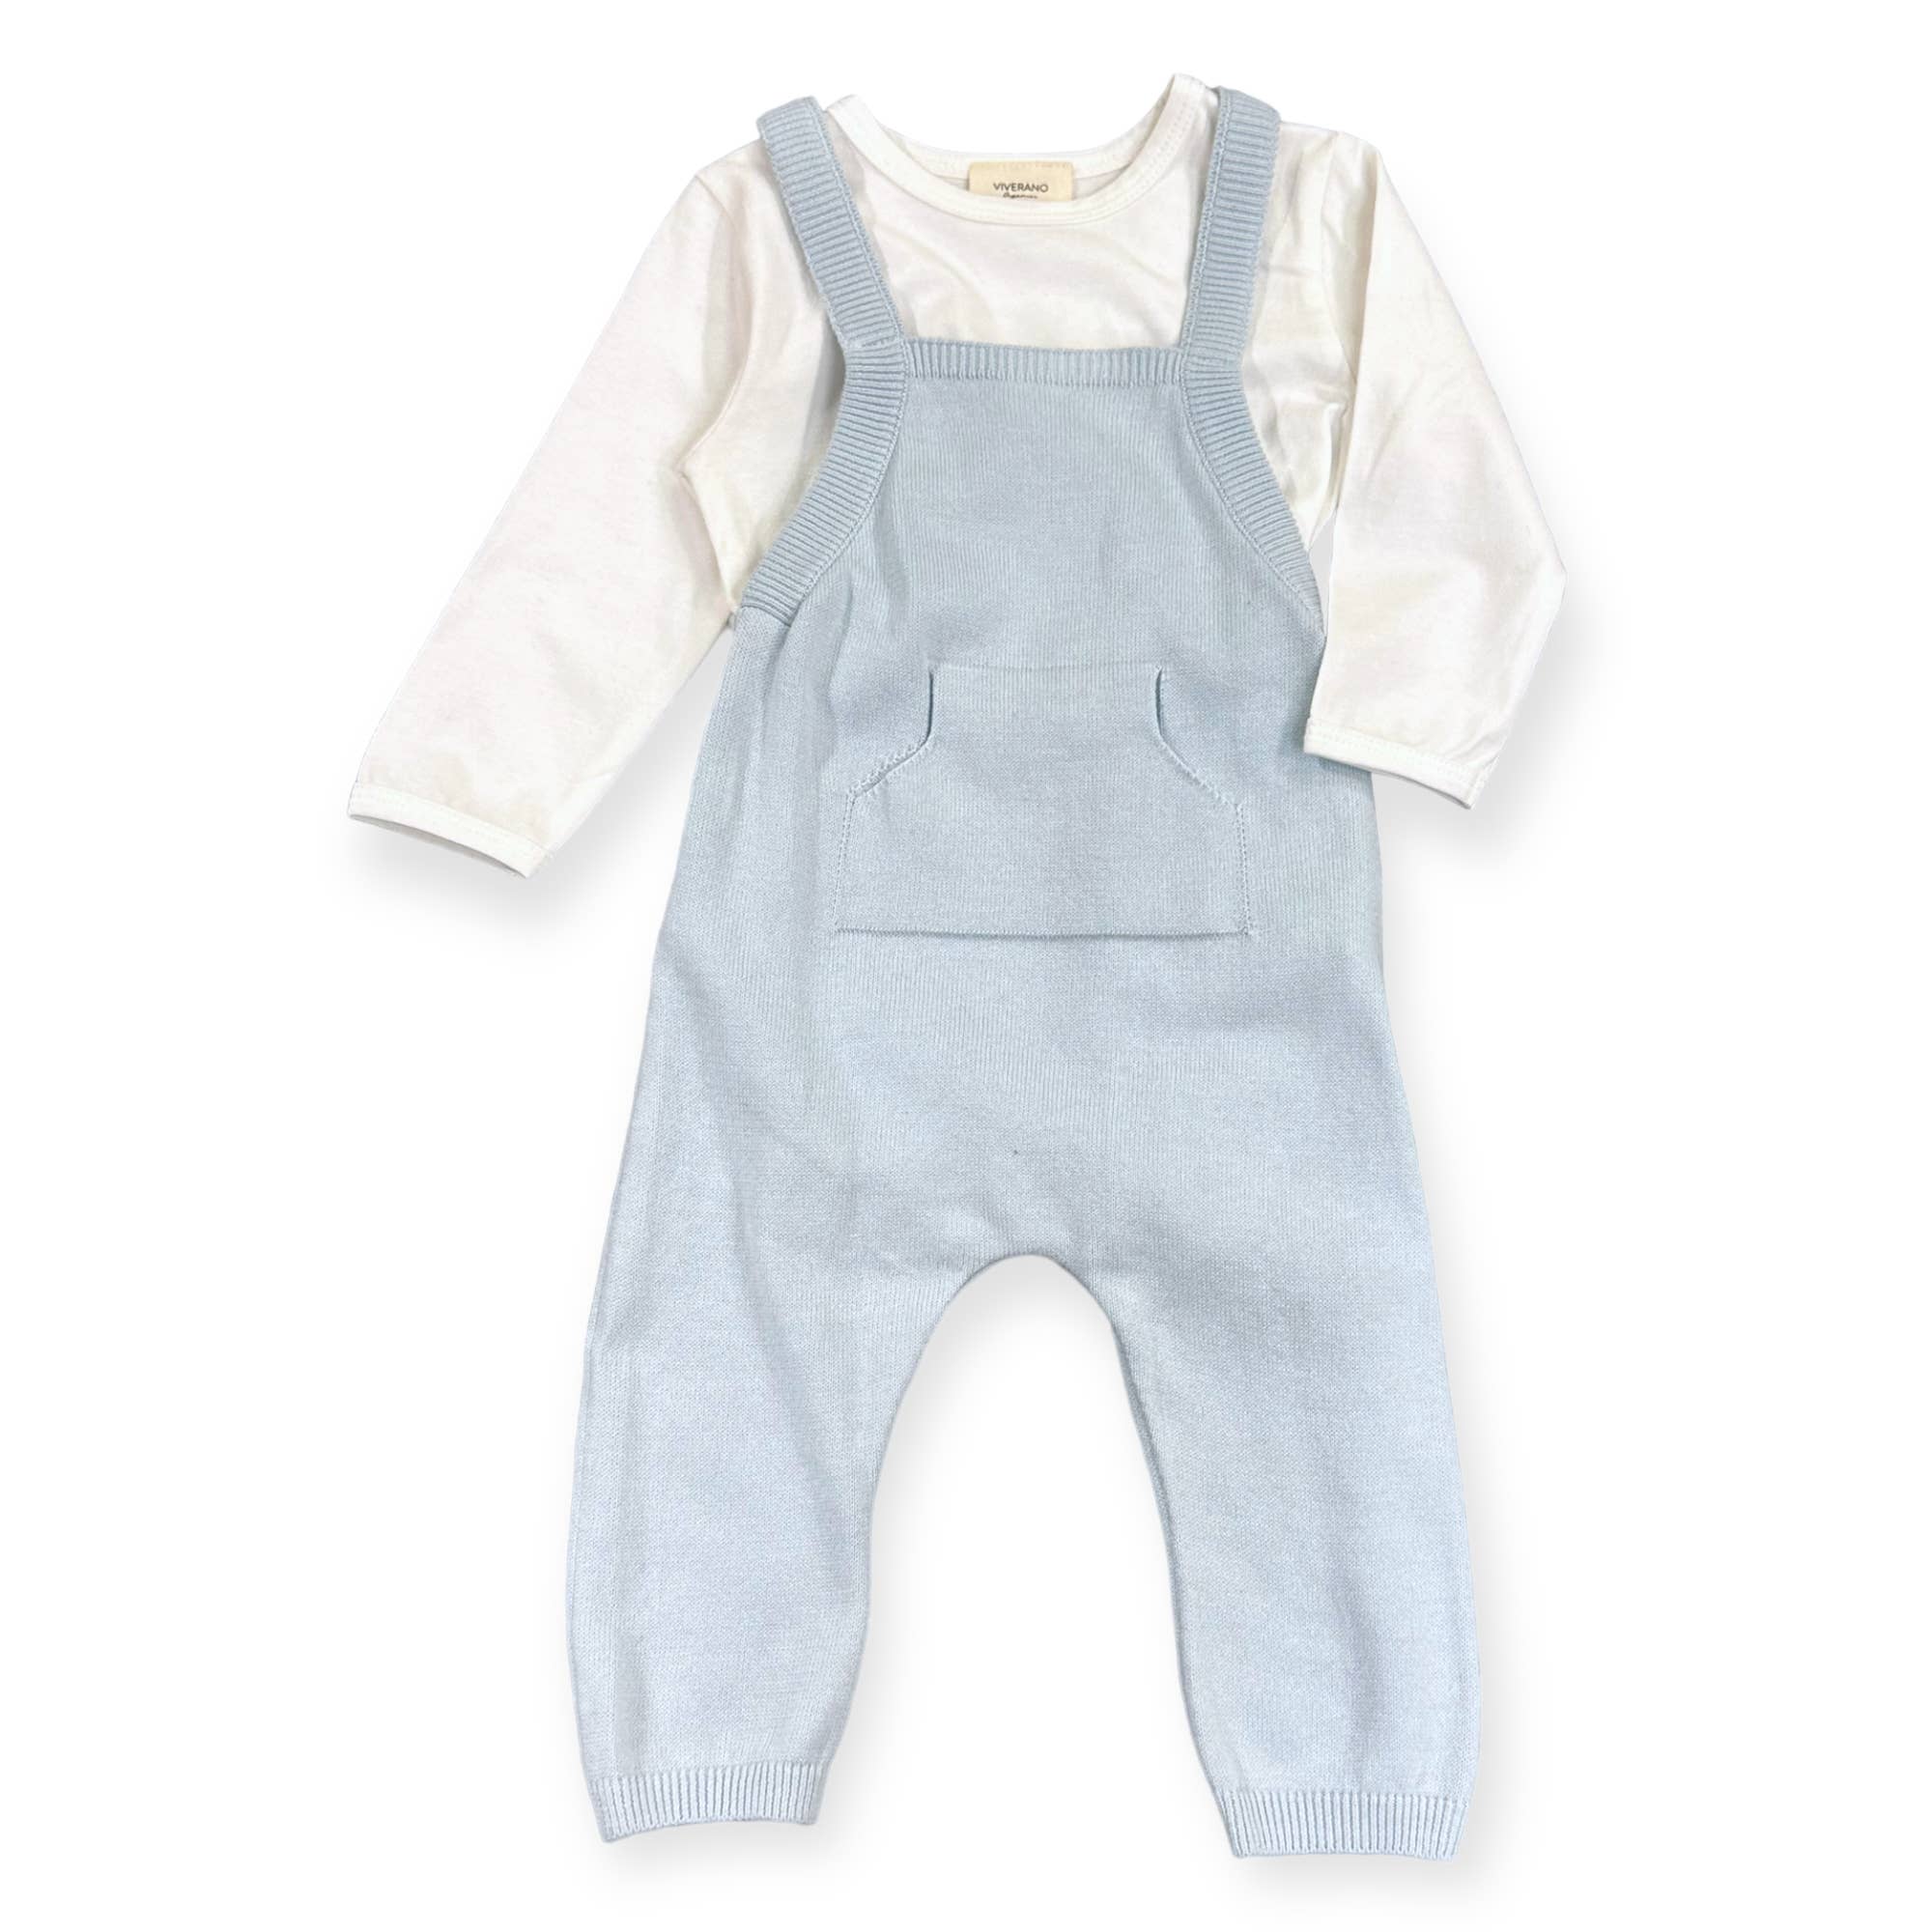 Experience ultimate comfort and cuteness with our Milan Kangaroo Pocket Baby Overall + Bodysuit Set! Made with 100% organic cotton for lightweight and all-season wear. The cashmere-like softness and cute kangaroo pocket detail add extra charm. Adjustable straps and quick snaps along the crotch make changing a breeze. Coconut shell buttons add a touch of natural beauty.  Ethically produced in India, supporting better livelihoods for small grower farmers.